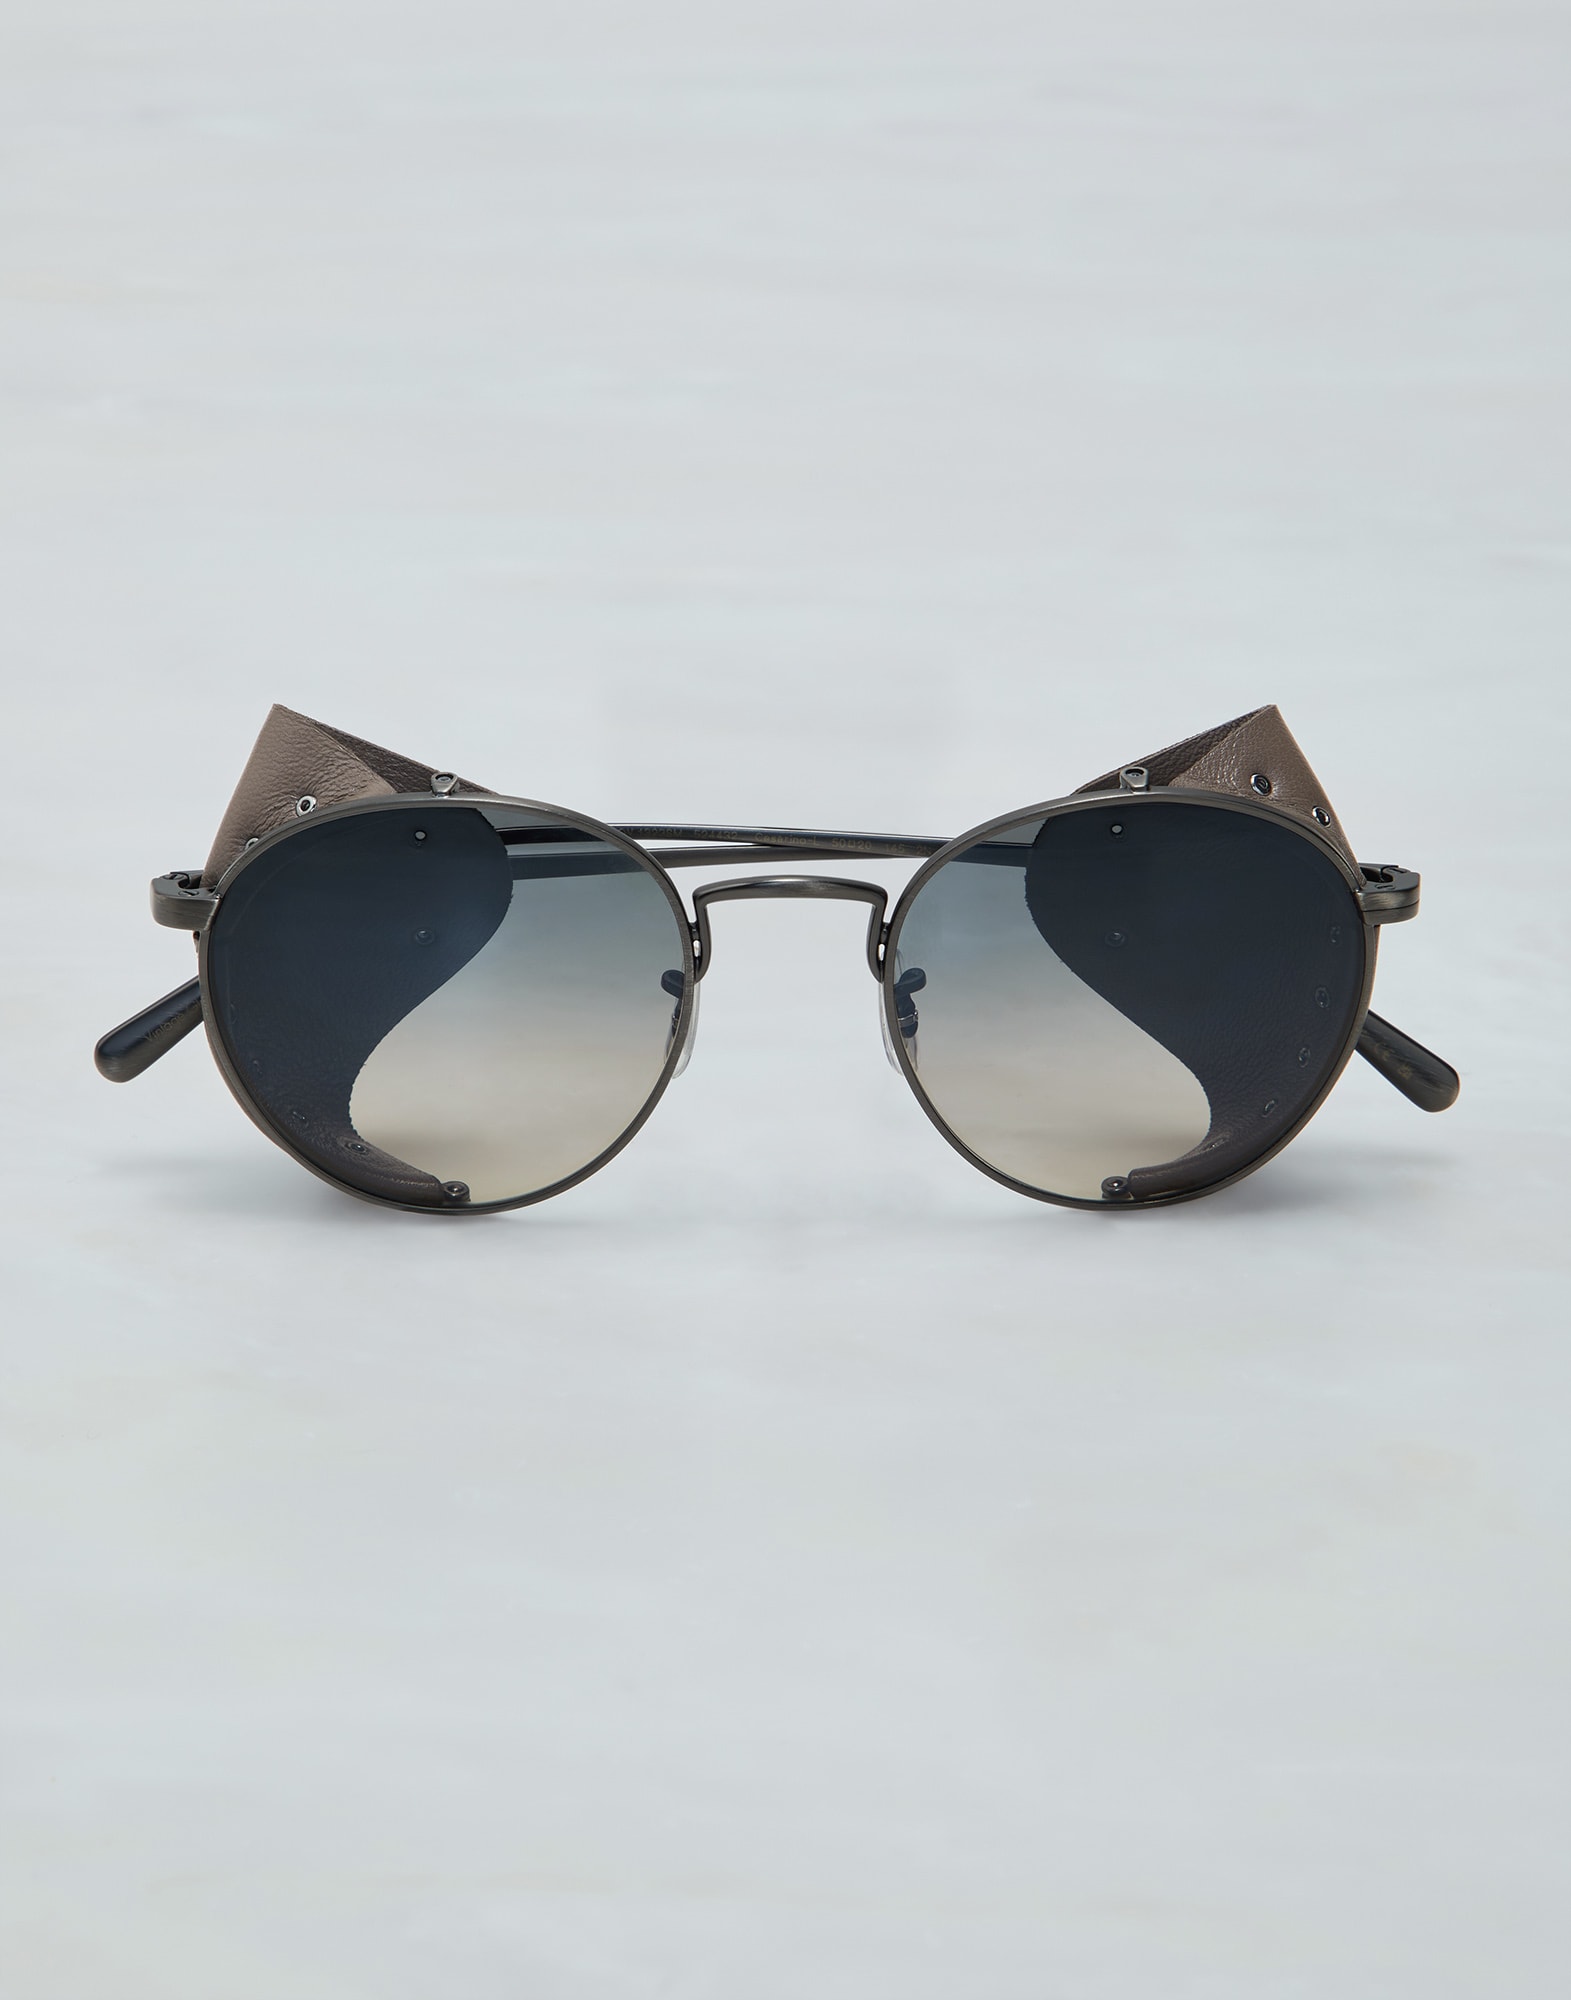 Aggregate 281+ leather shield sunglasses best